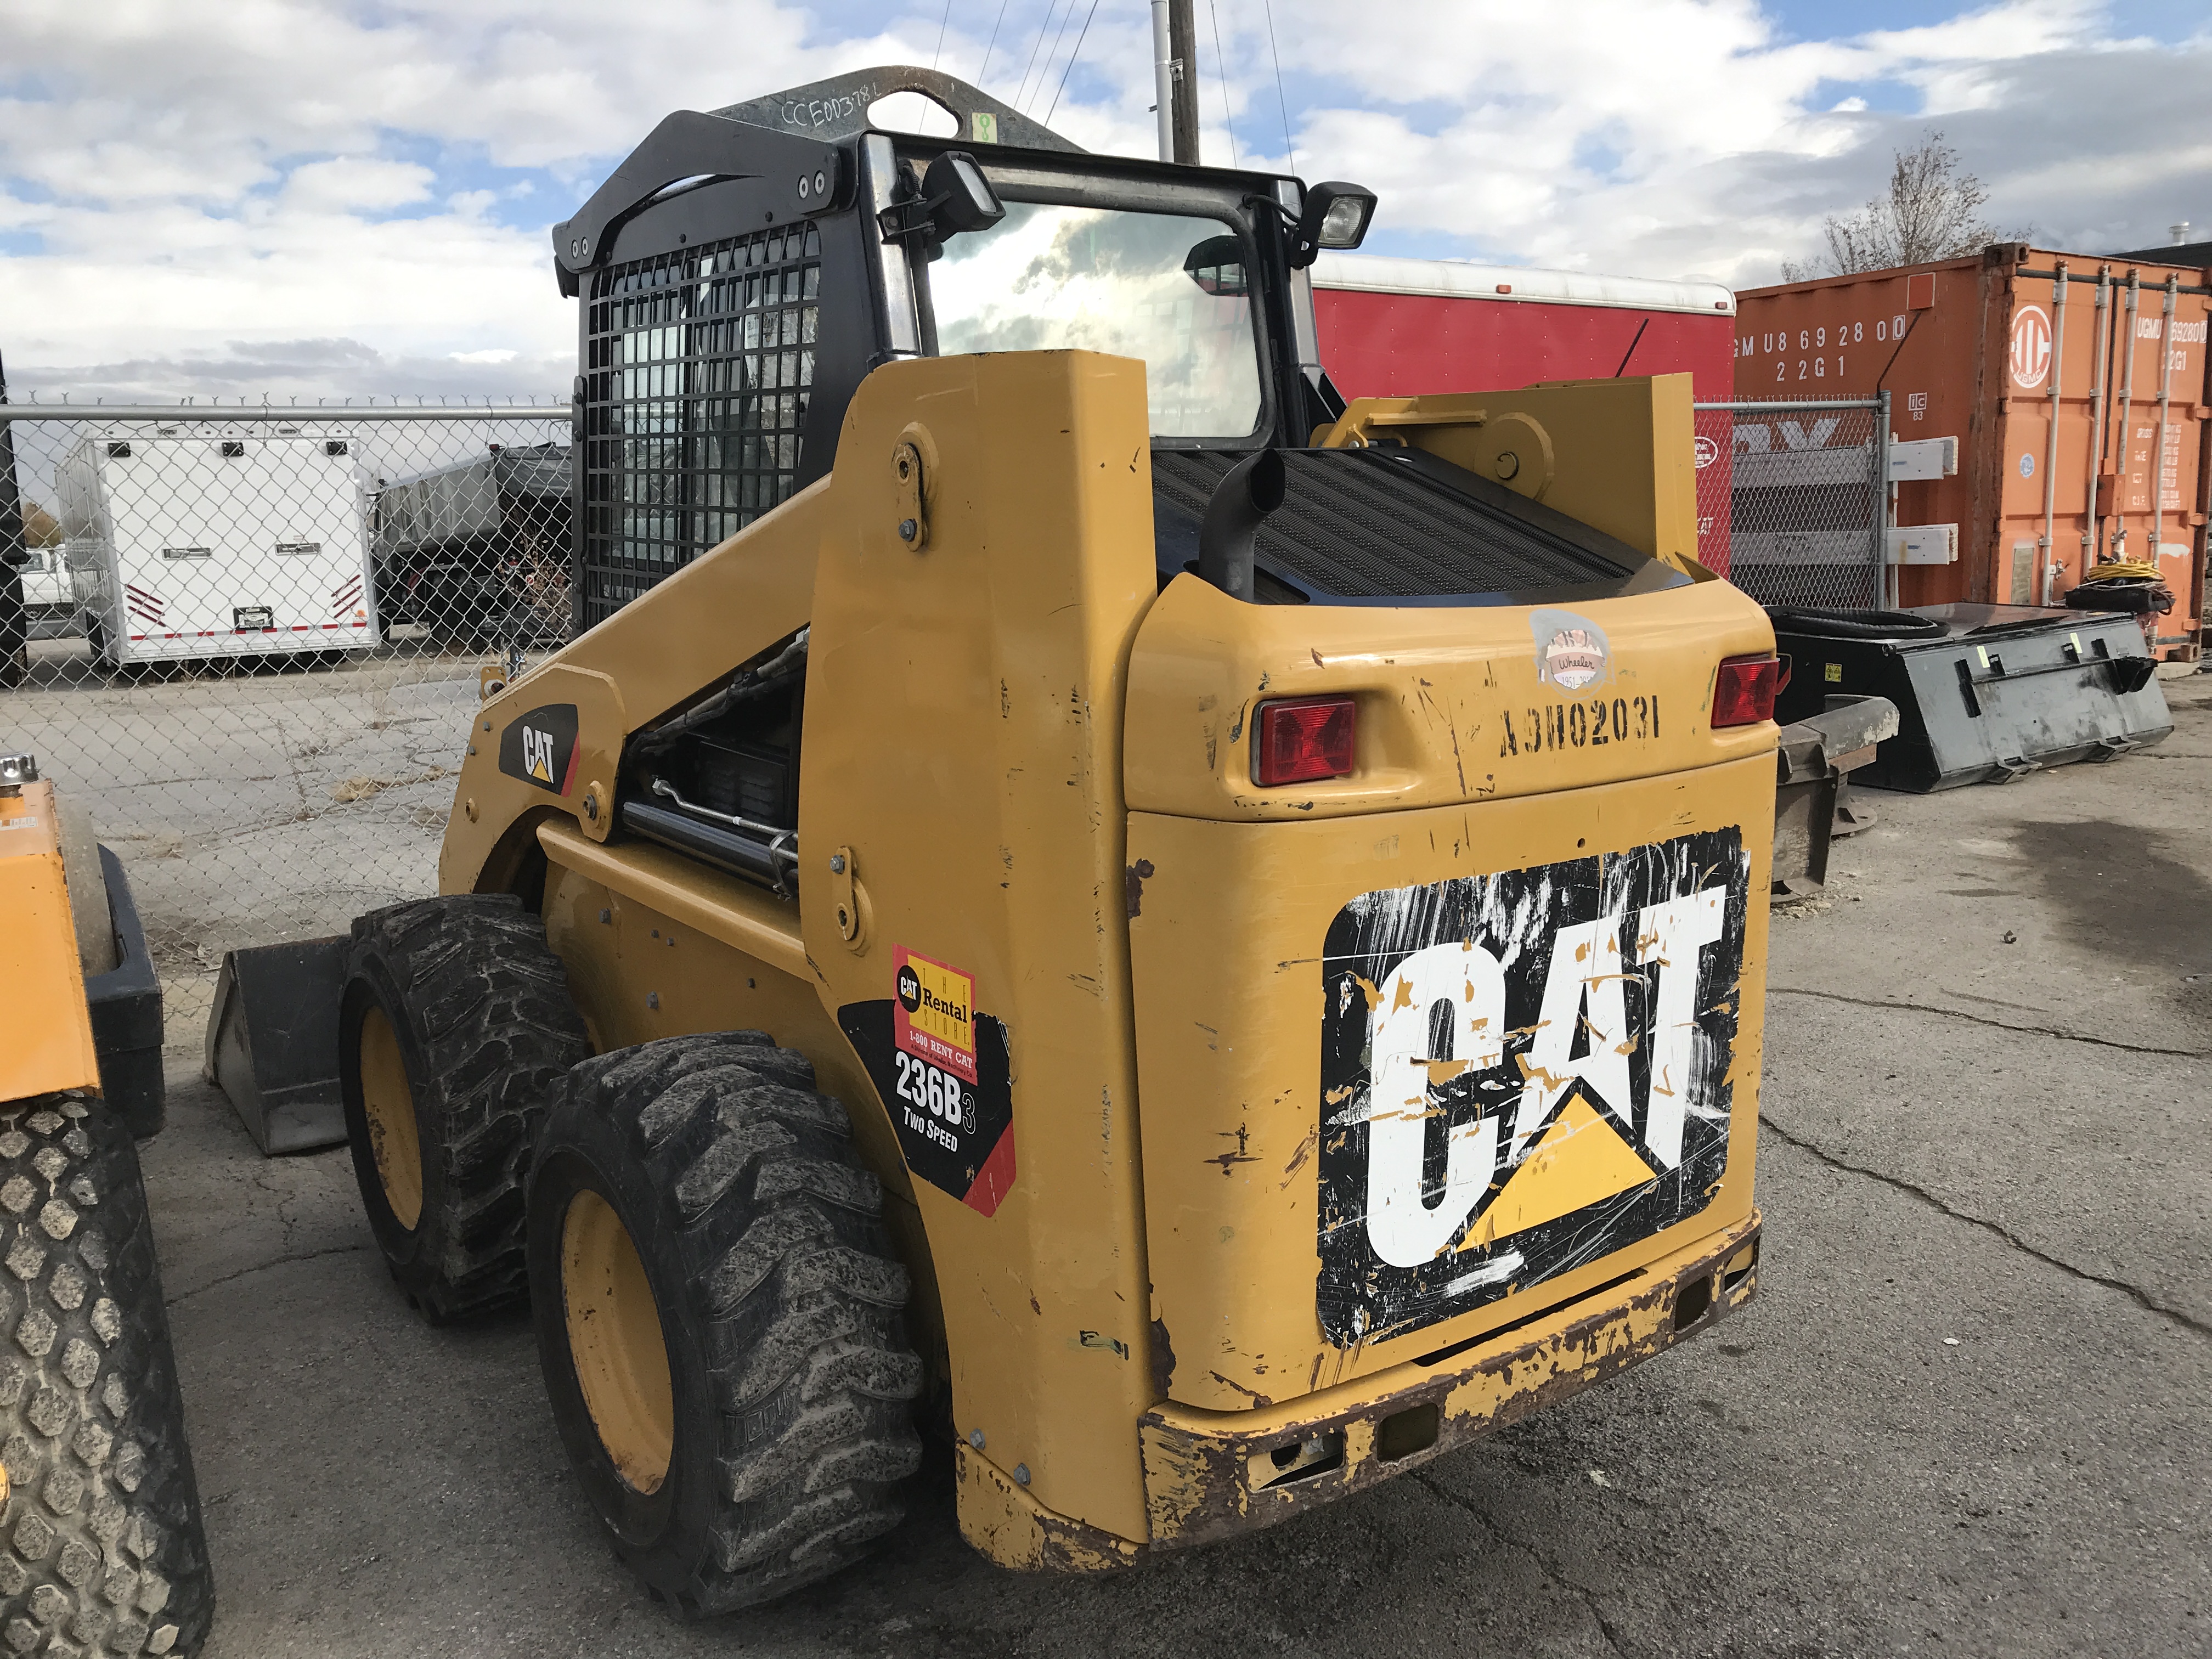 236B SKID STEER LOADER & ATTACHMENTS - Dogface Heavy Equipment Sales ...